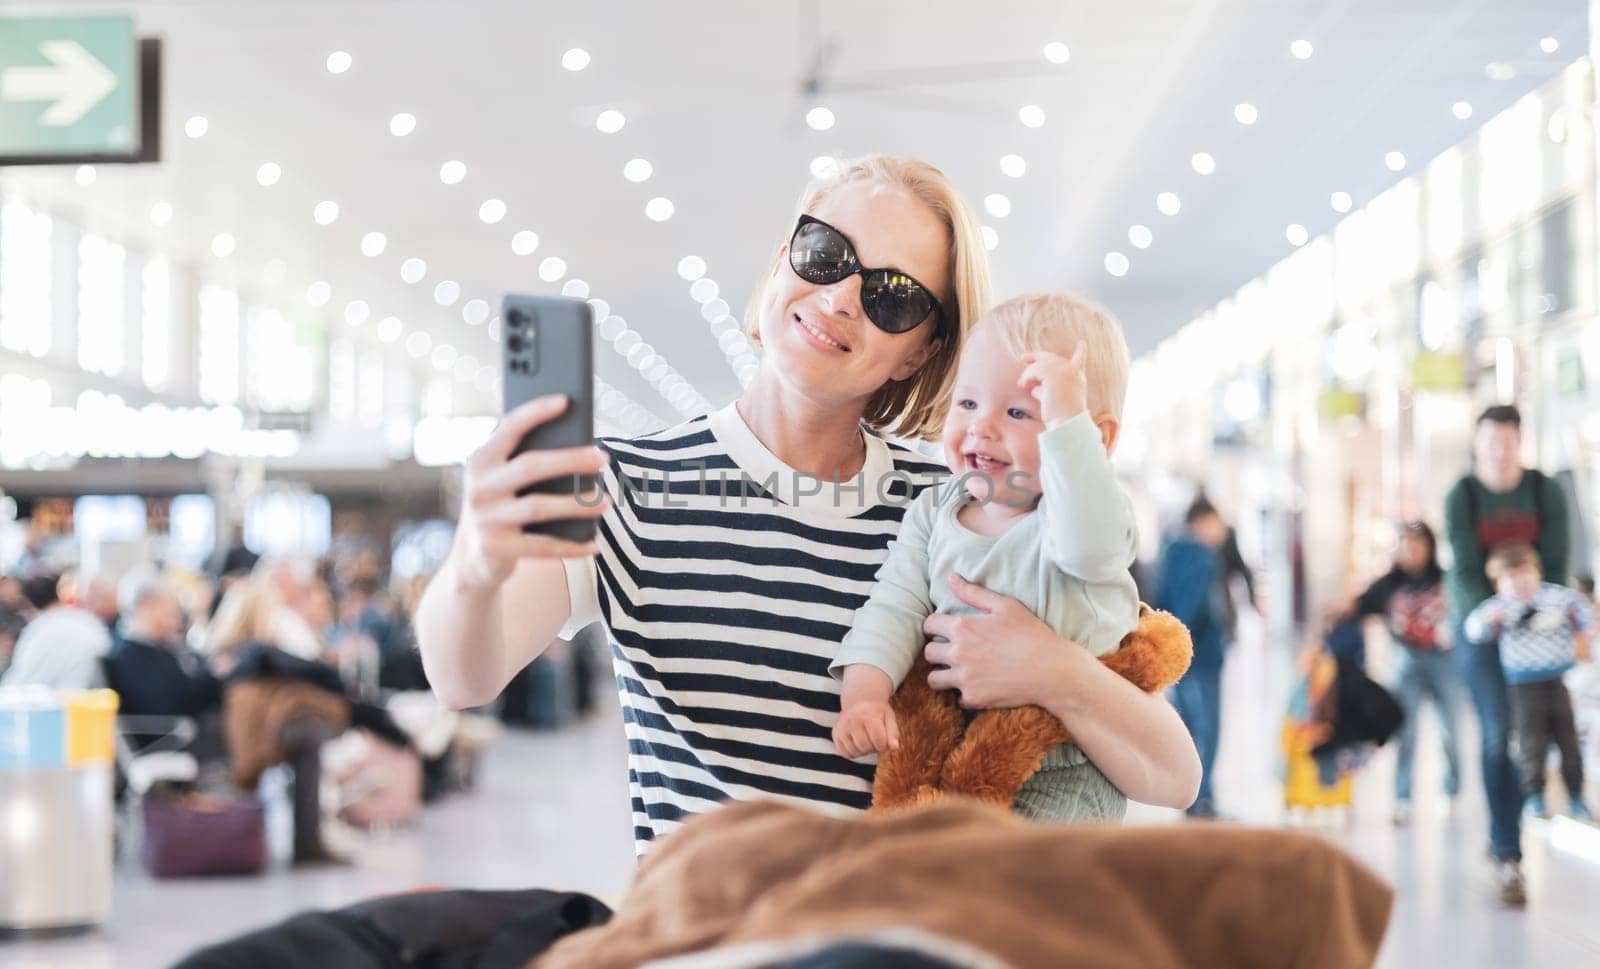 Mother taking selfie with mobile phone, while traveling with child, holding his infant baby boy at airport, waiting to board a plane. Travel with kids concept